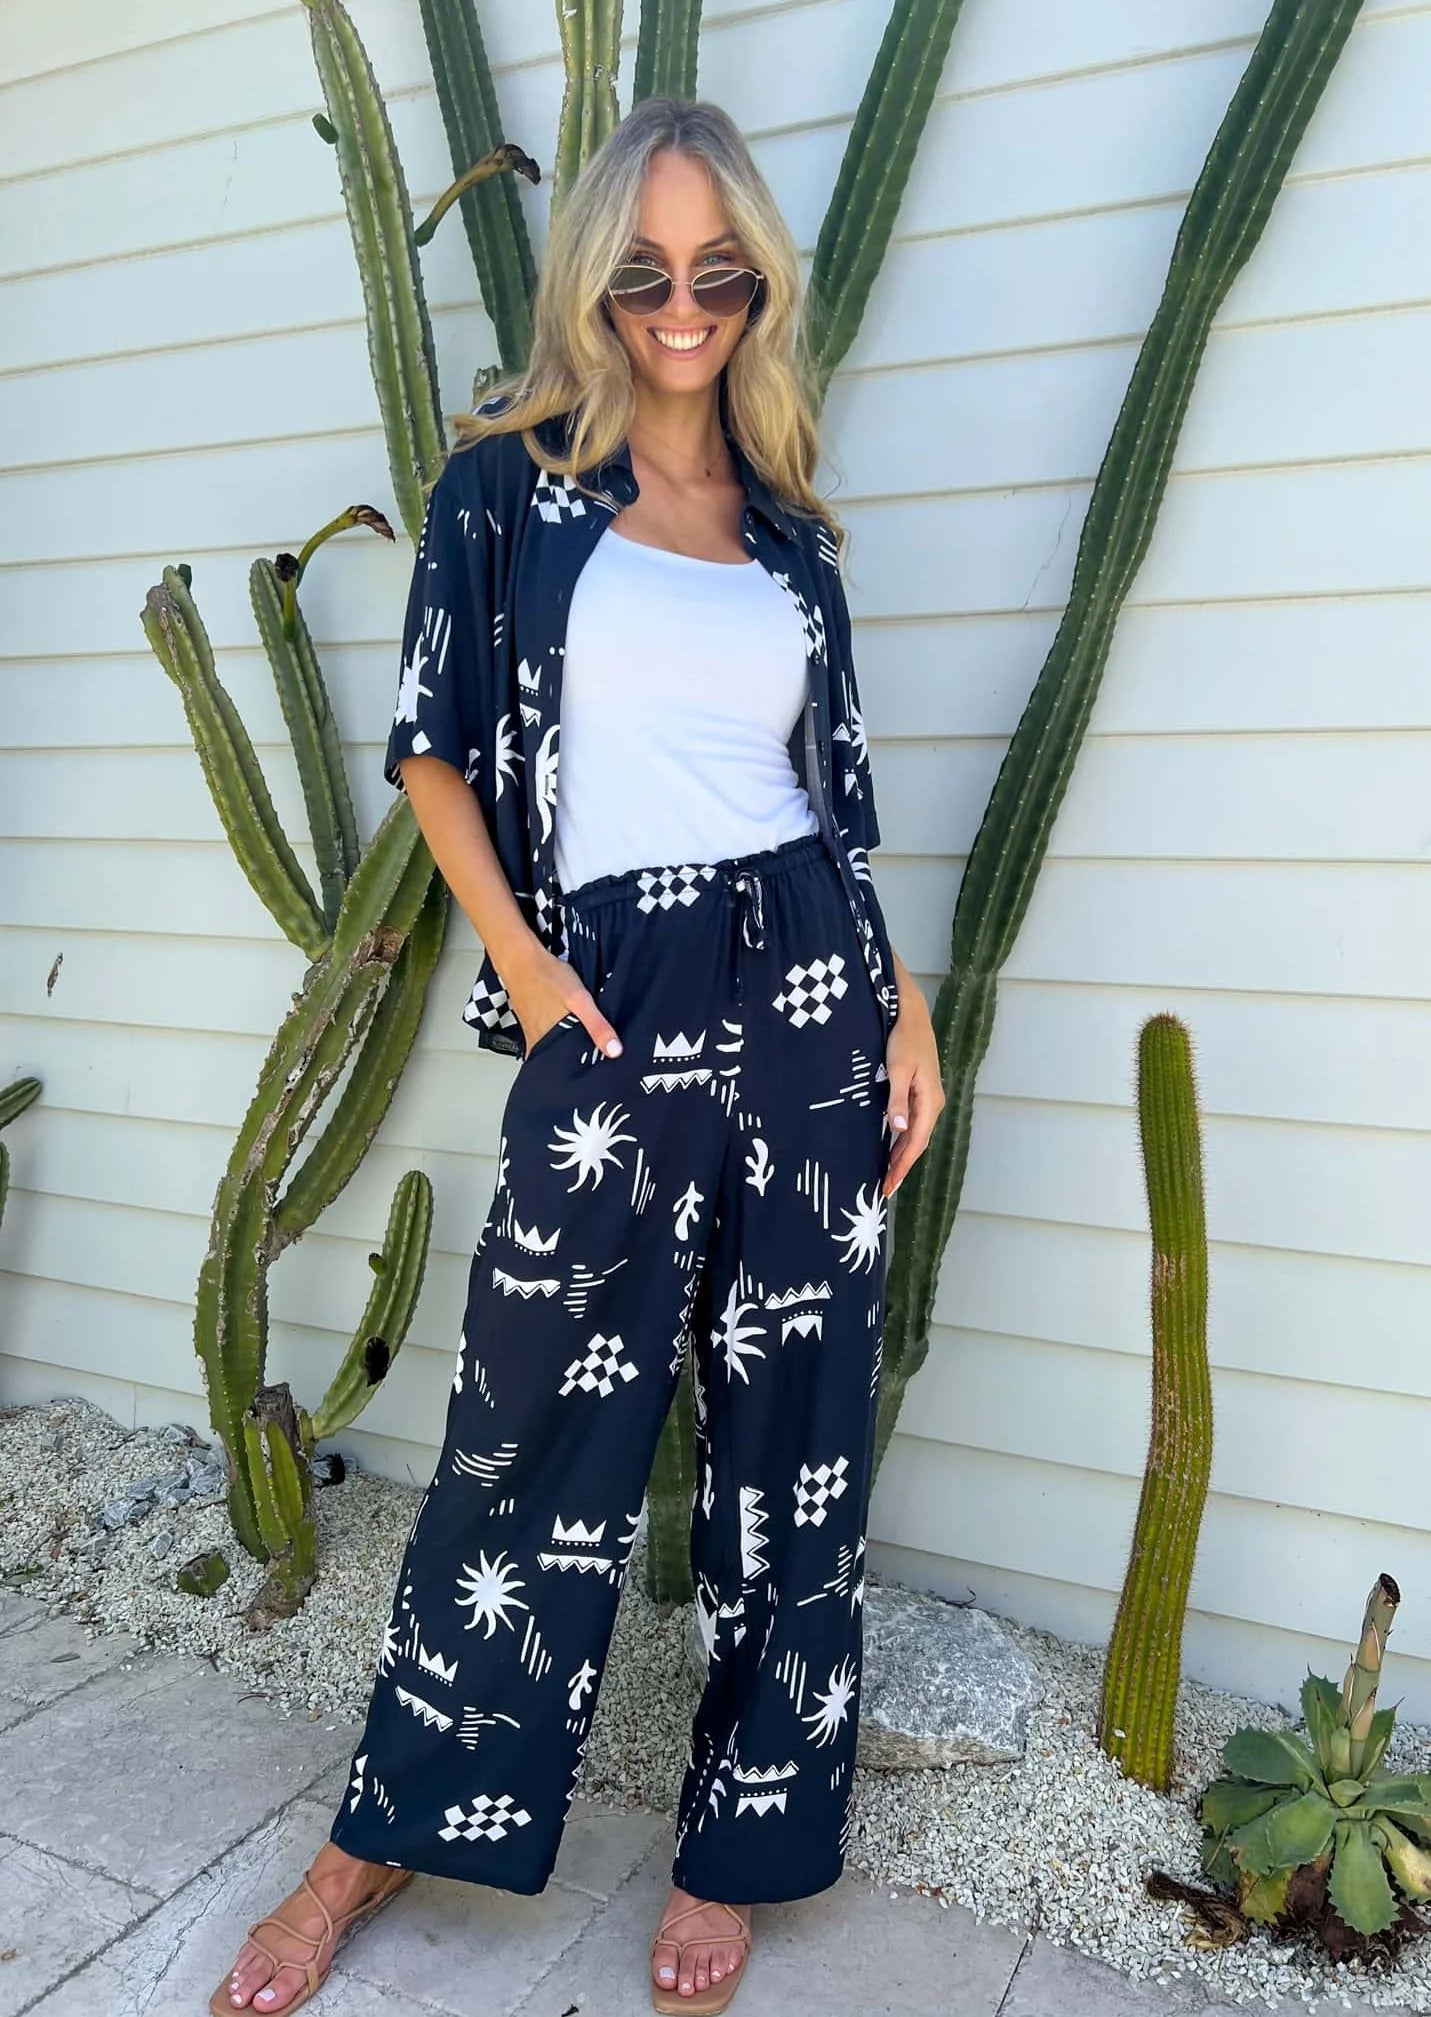 Get ready to rock in the Tanah Set, featuring an oversized top and elasticated drawstring waist for a comfortable fit. With functional buttons and pockets, this navy print set is perfect for any occasion. One size fits all. No need to stress about sizing! (We got you, girl!)